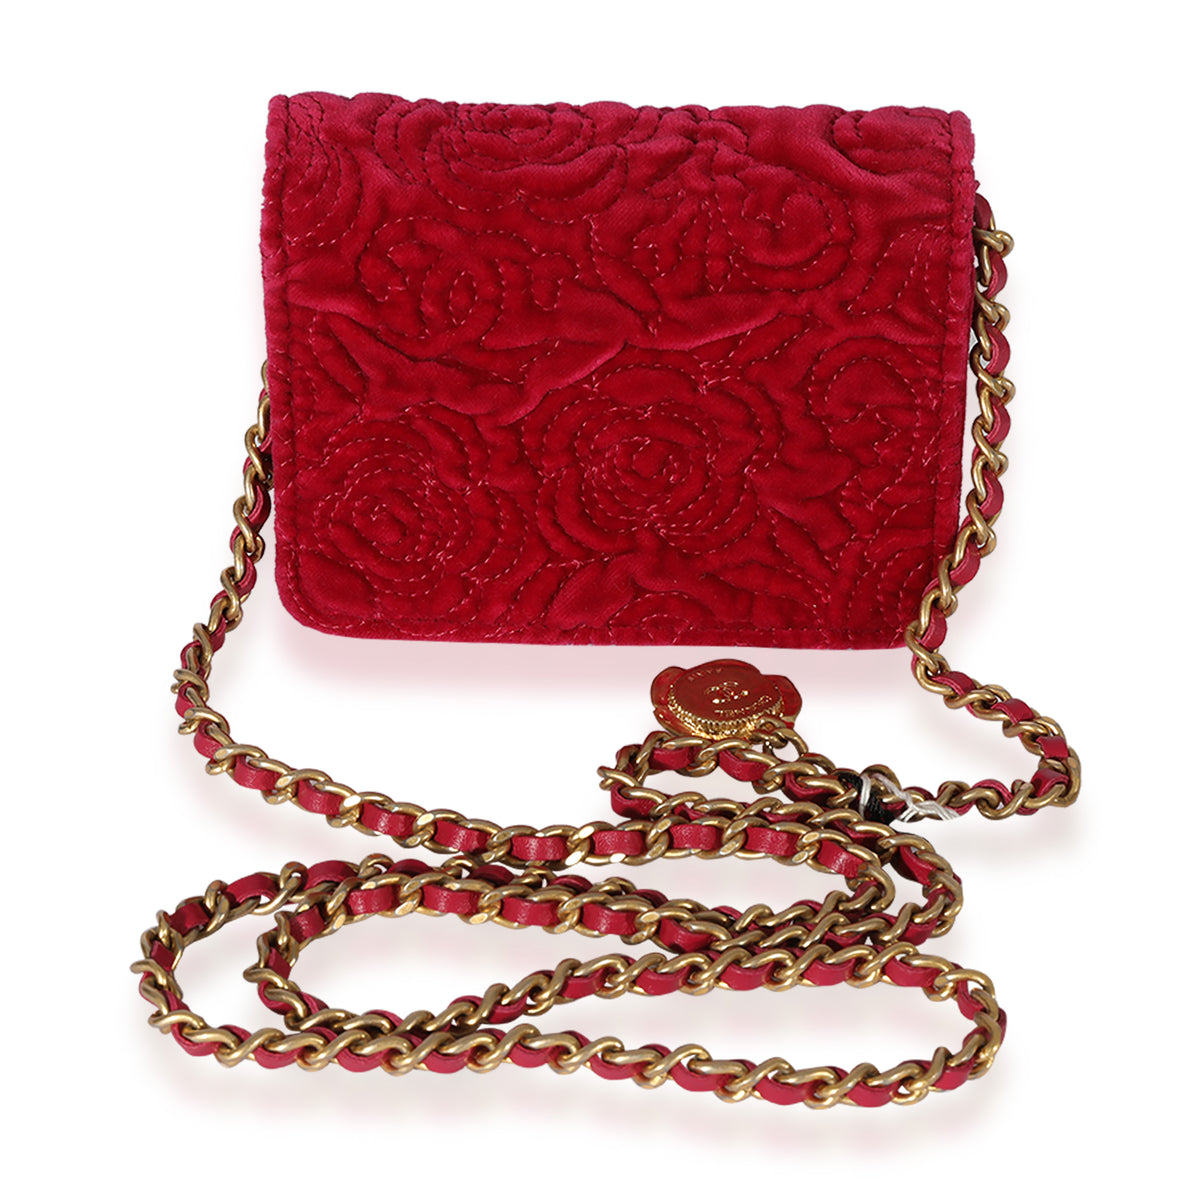 Chanel Pearl Crush Quilted Flap Coin Purse With Adjustable Chain, Fuchsia  Velvet with Gold Hardware, New in Box - Julia Rose Boston